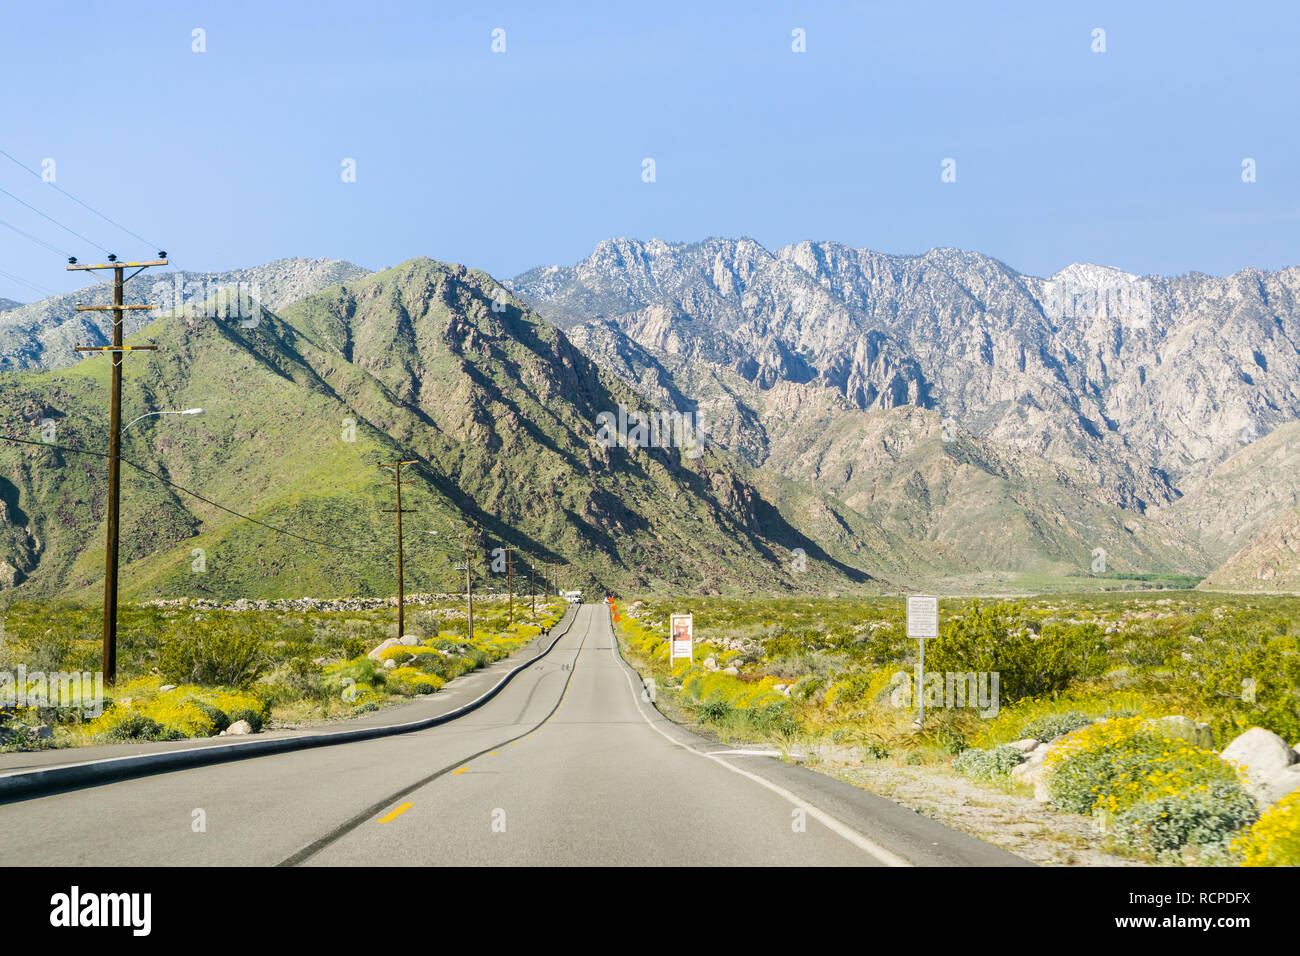 Road leading to the Palm Springs Aerial Tramway, Mount San Jacinto, California Stock Photo